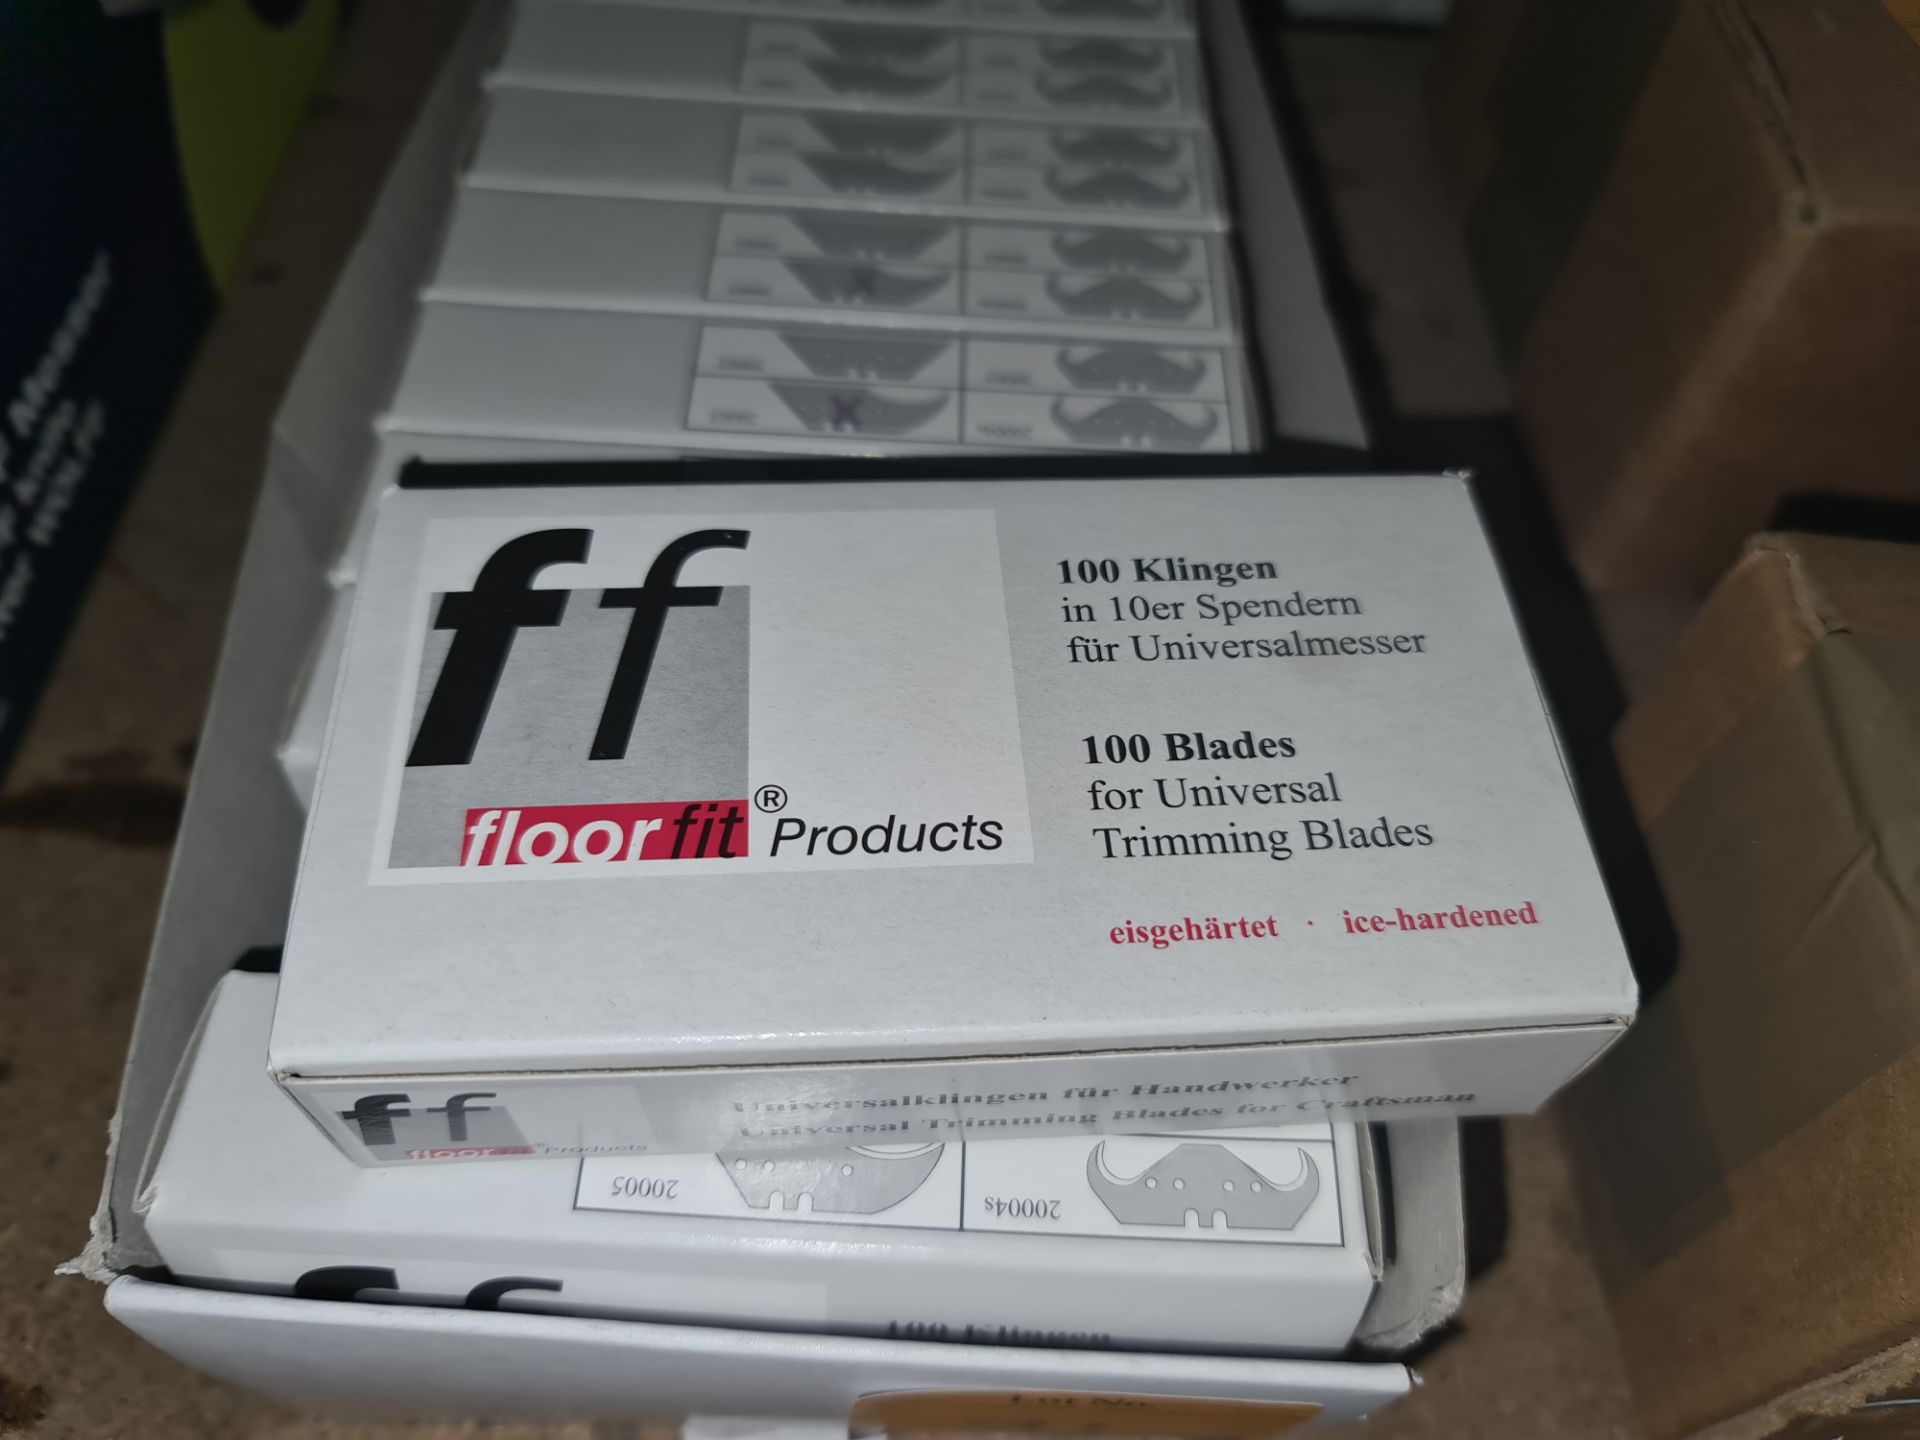 10 boxes of FF (Floorfit) blades, each box containing 100 universal trimming bladesLots 31 - 328 - Image 3 of 3